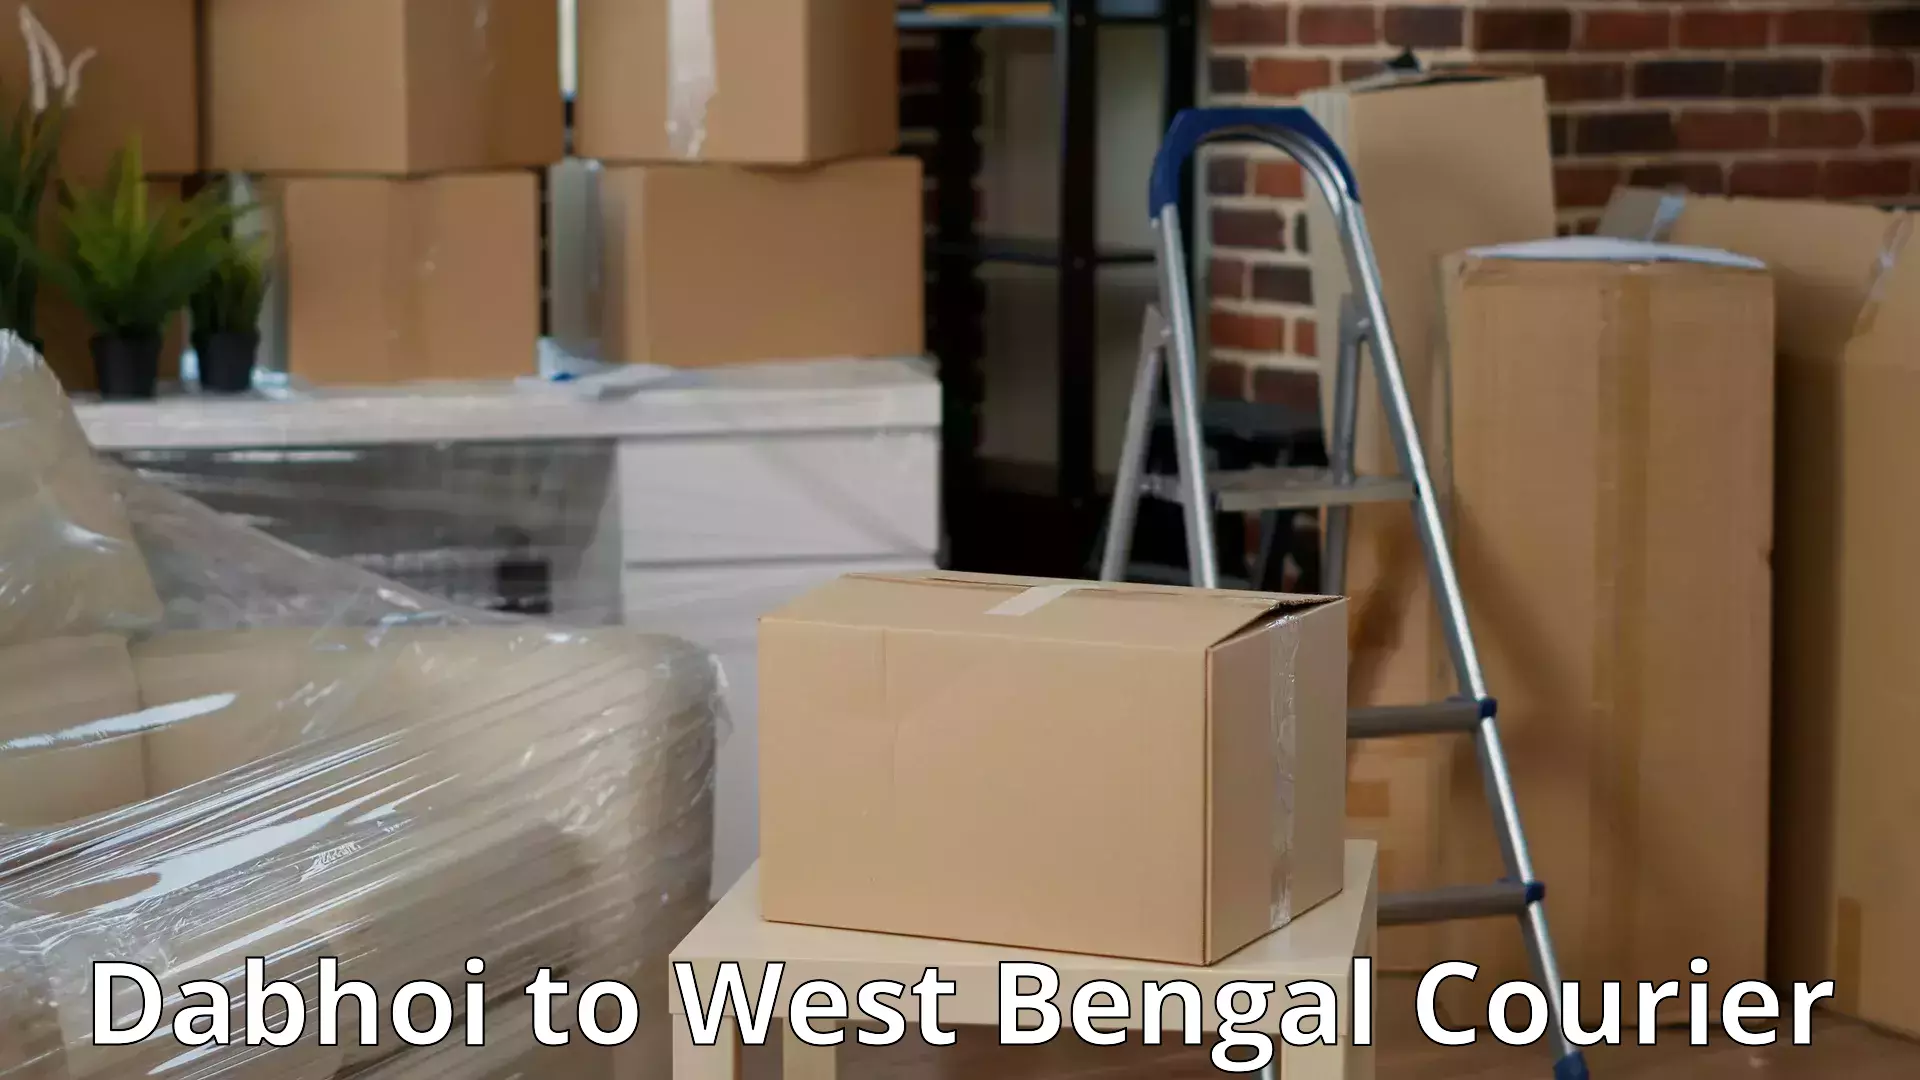 Full-service household moving Dabhoi to West Bengal